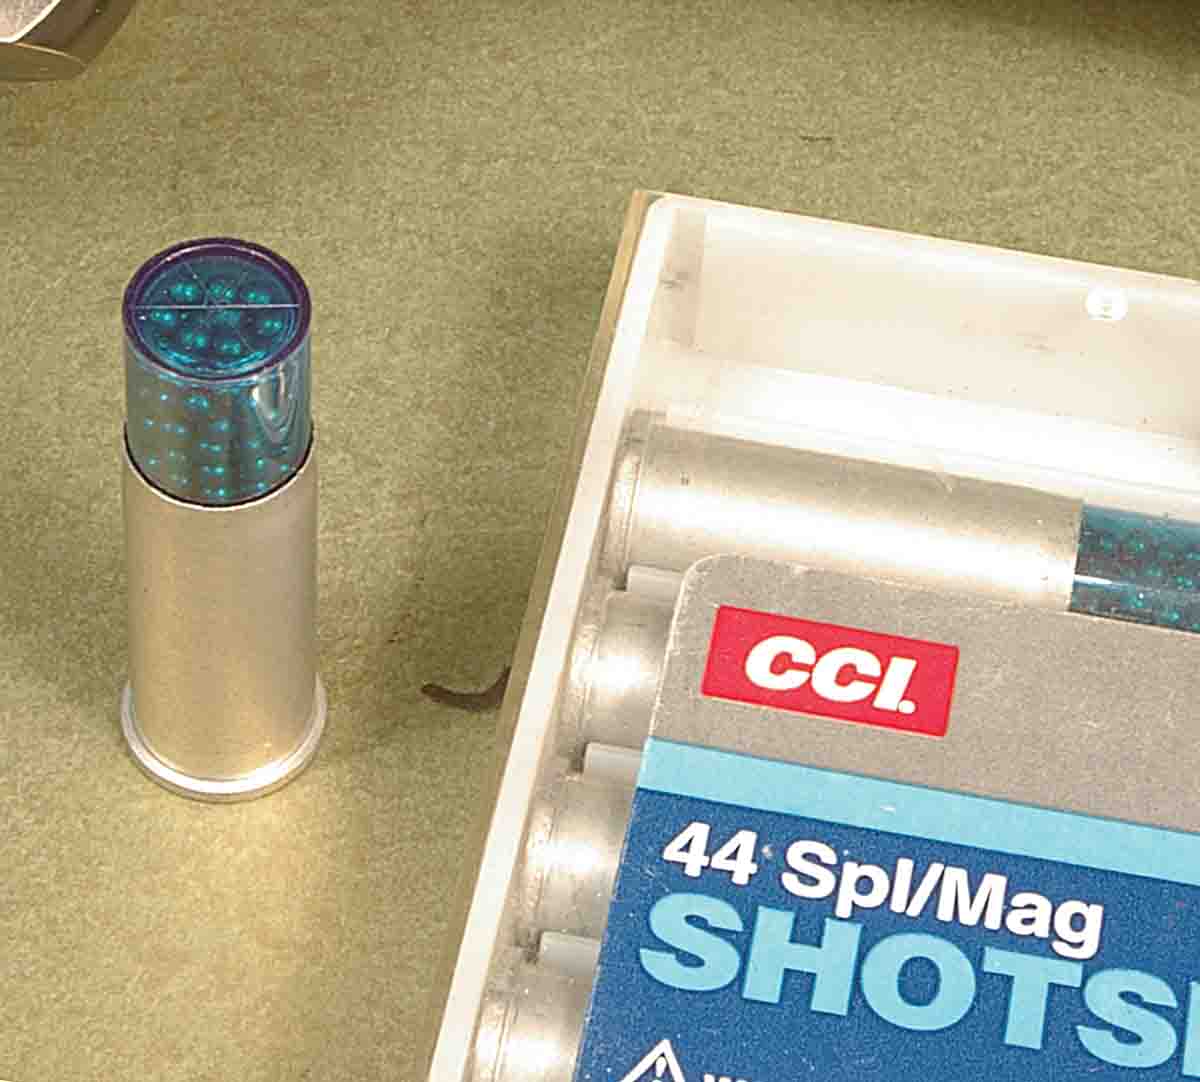 If you feel threatened by snakes or English sparrows, CCI makes a shotshell load for the .44.